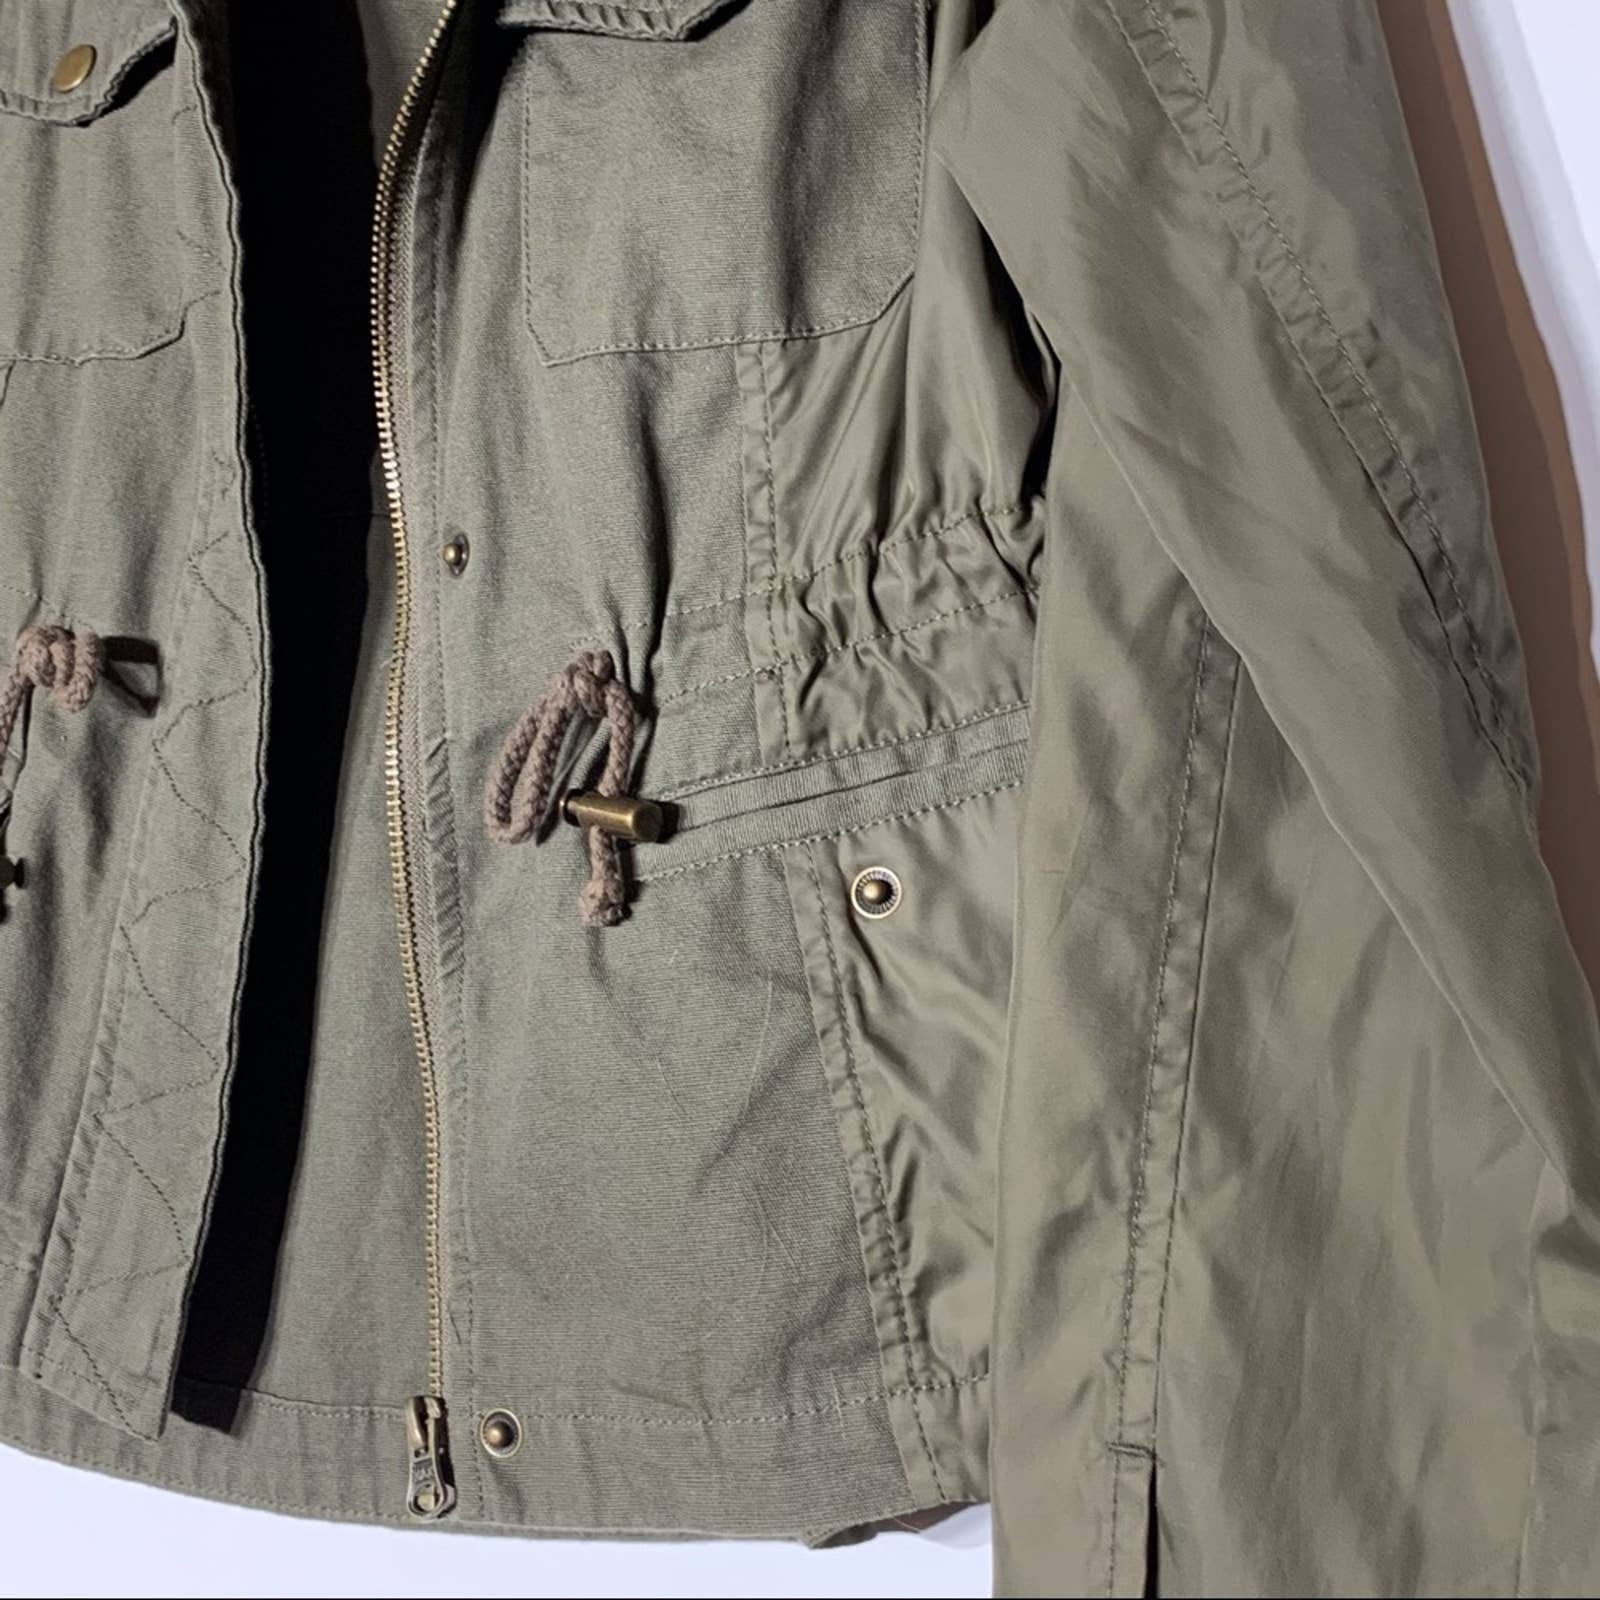 Wholesale price EUC American Rag Military Style Olive Green Jacket JvD2EPlma Online Shop